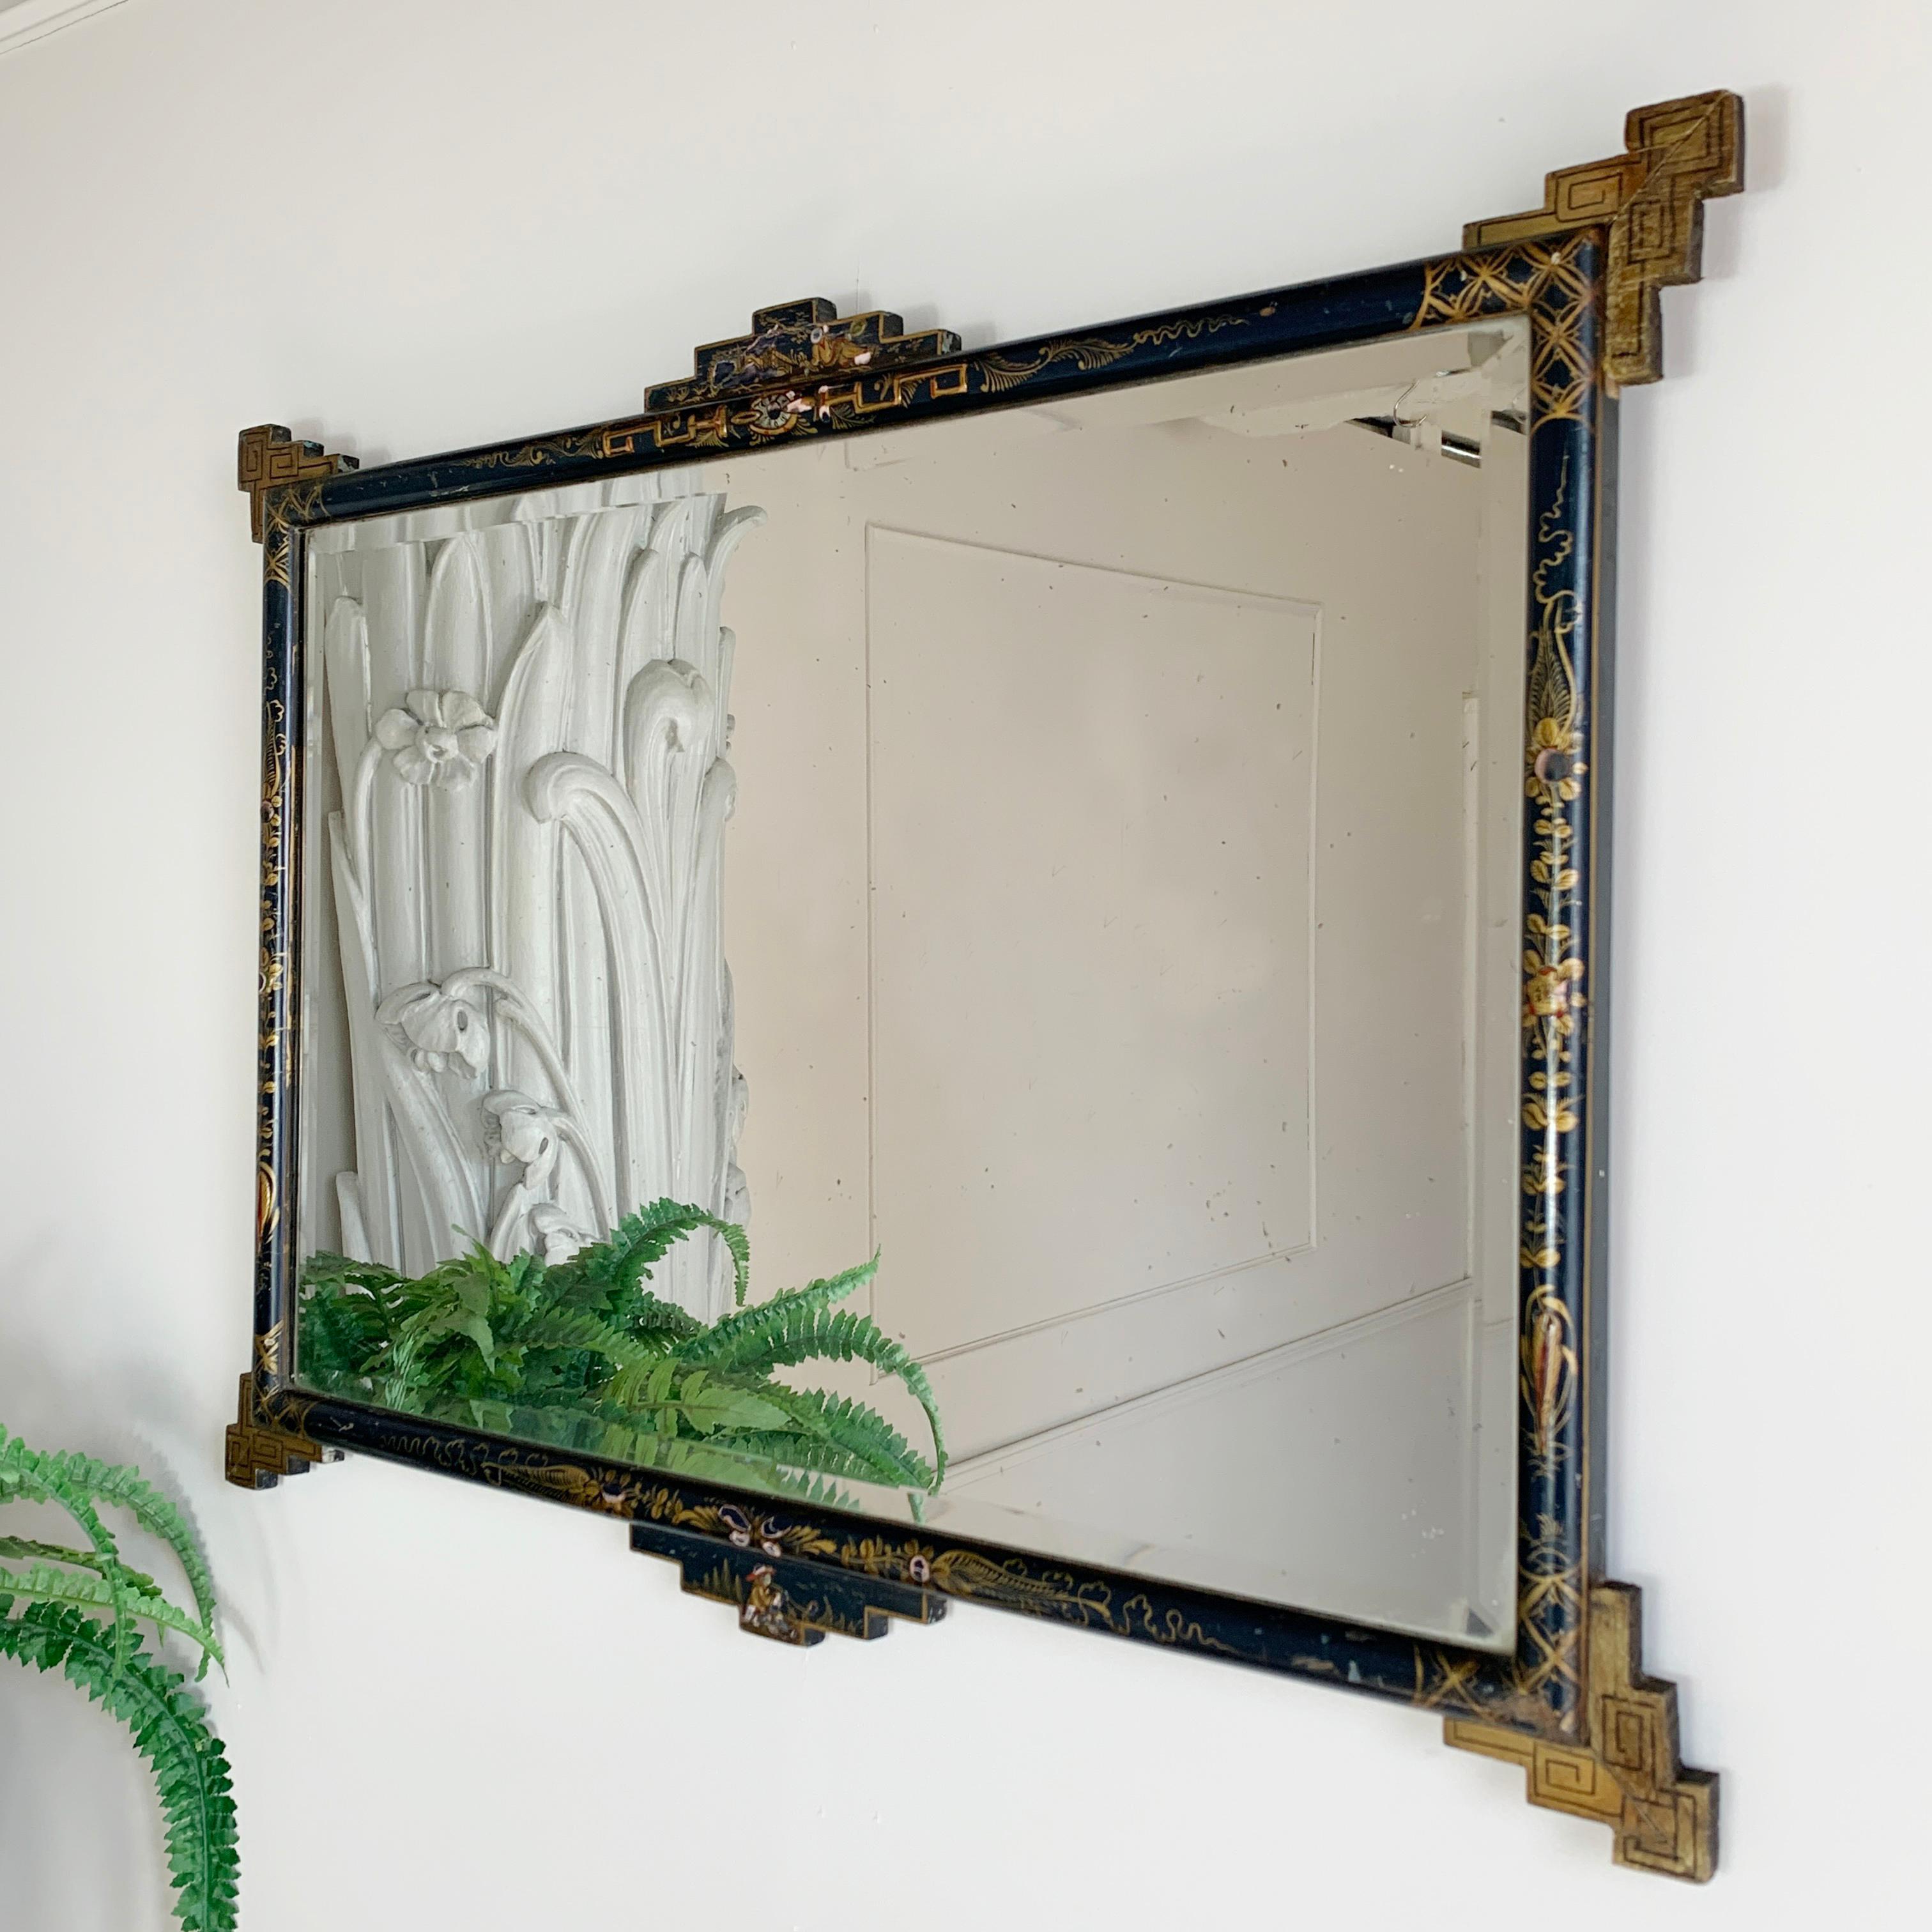 Late 19th century lacquered chinoiserie mirror in fabulous French navy blue colour
Dating from around 1890's
Navy background with gilt painted oriental landscapes and figures and unusual Greek key corner detailing
Original beveled mirror plate